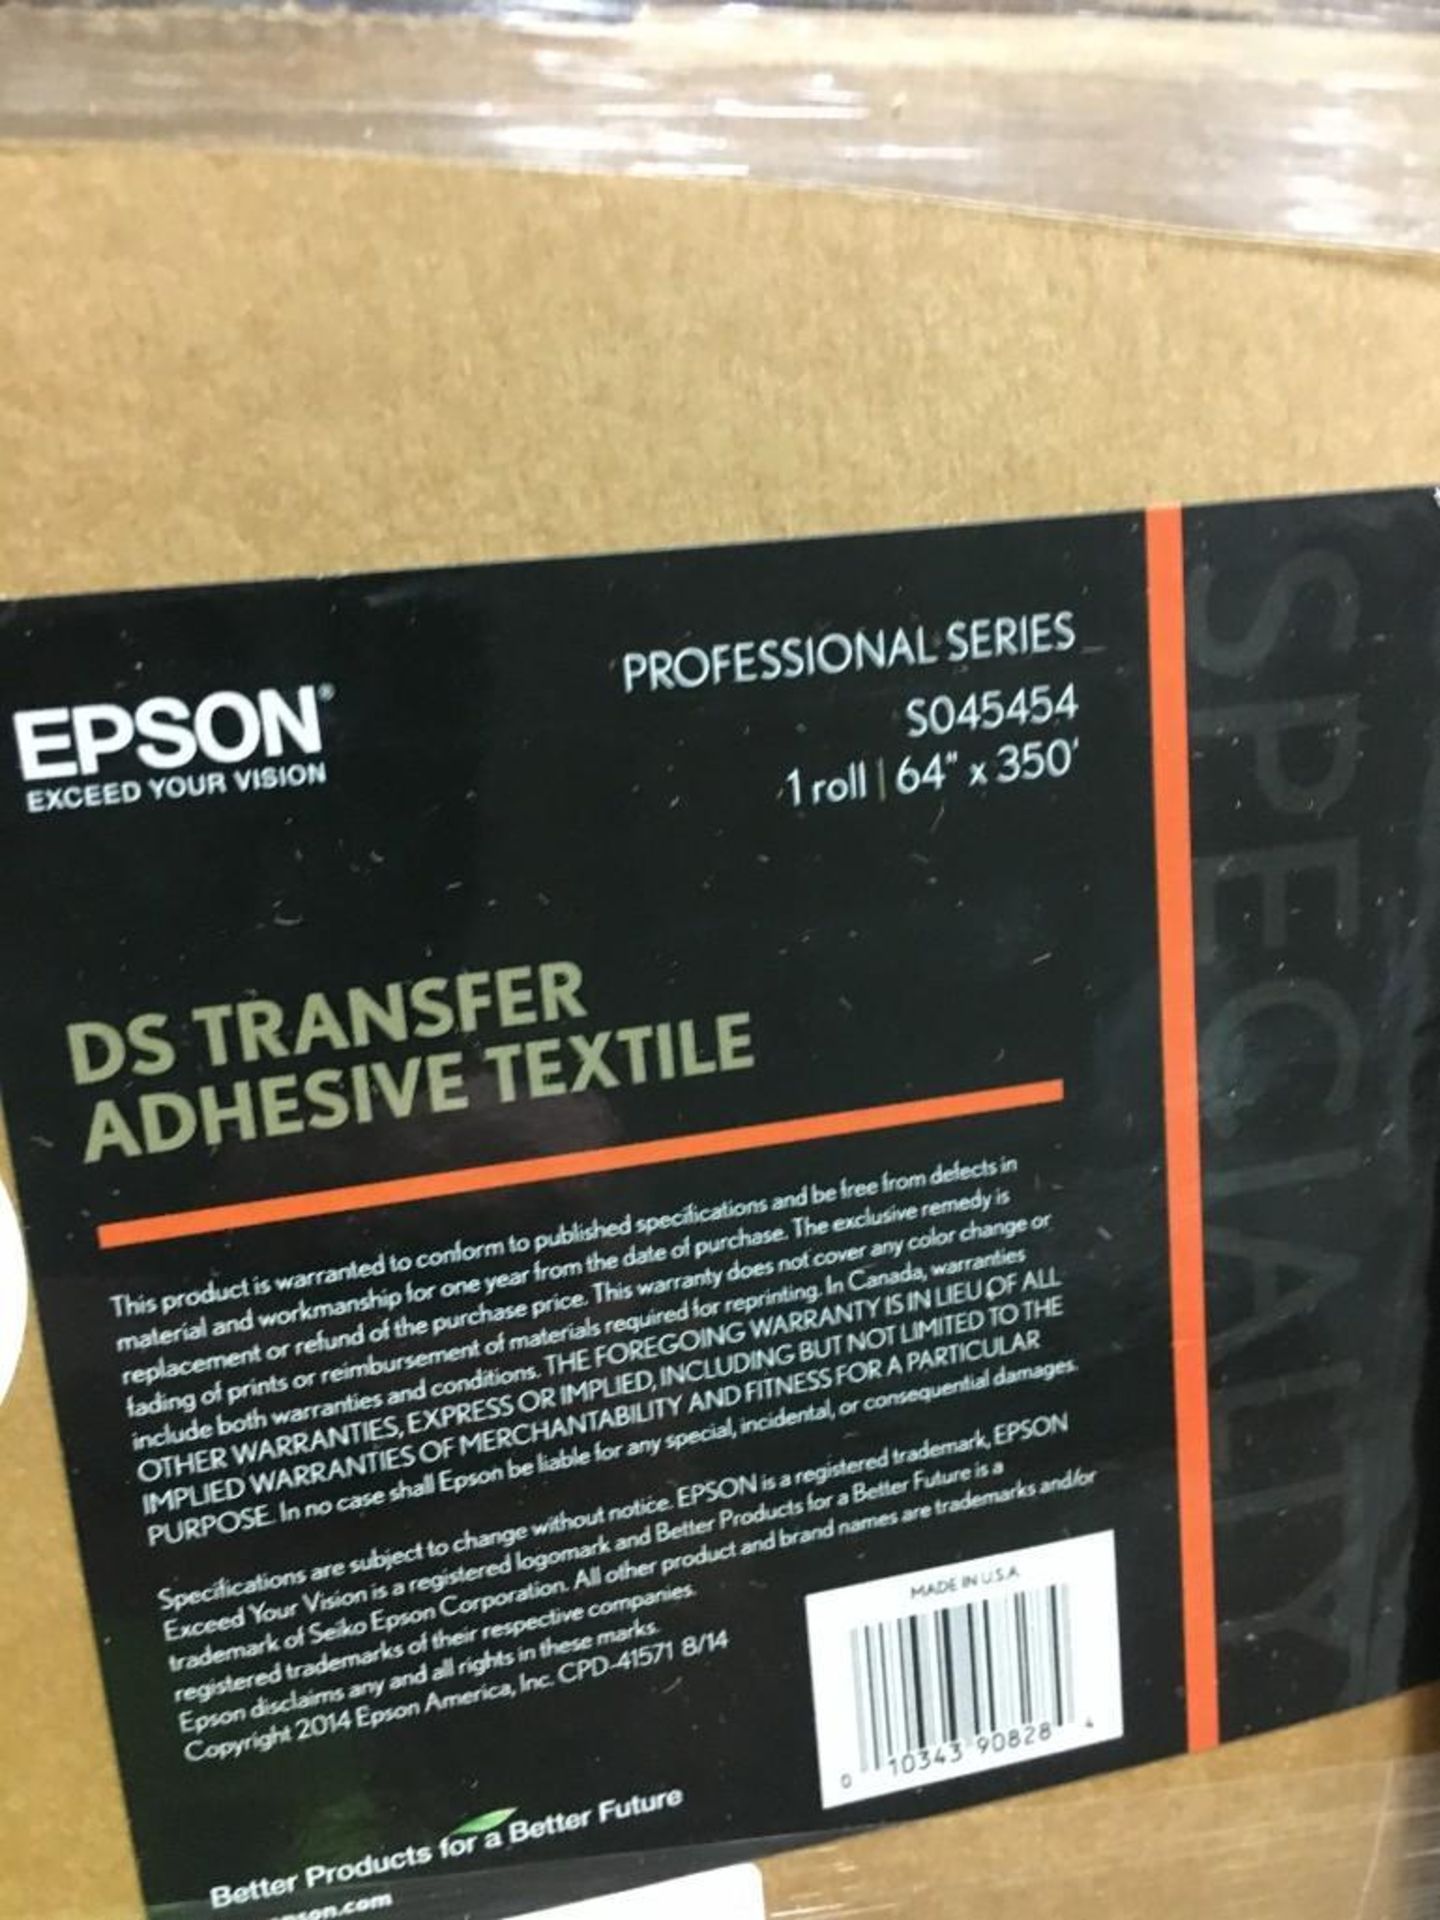 (36) BOXES OF EPSON DS TRANSFER ADHESIVE TEXTILE, 64 IN X 350 FT, (1) ROLL, PRODUCTION SERIES, S0454 - Image 2 of 2